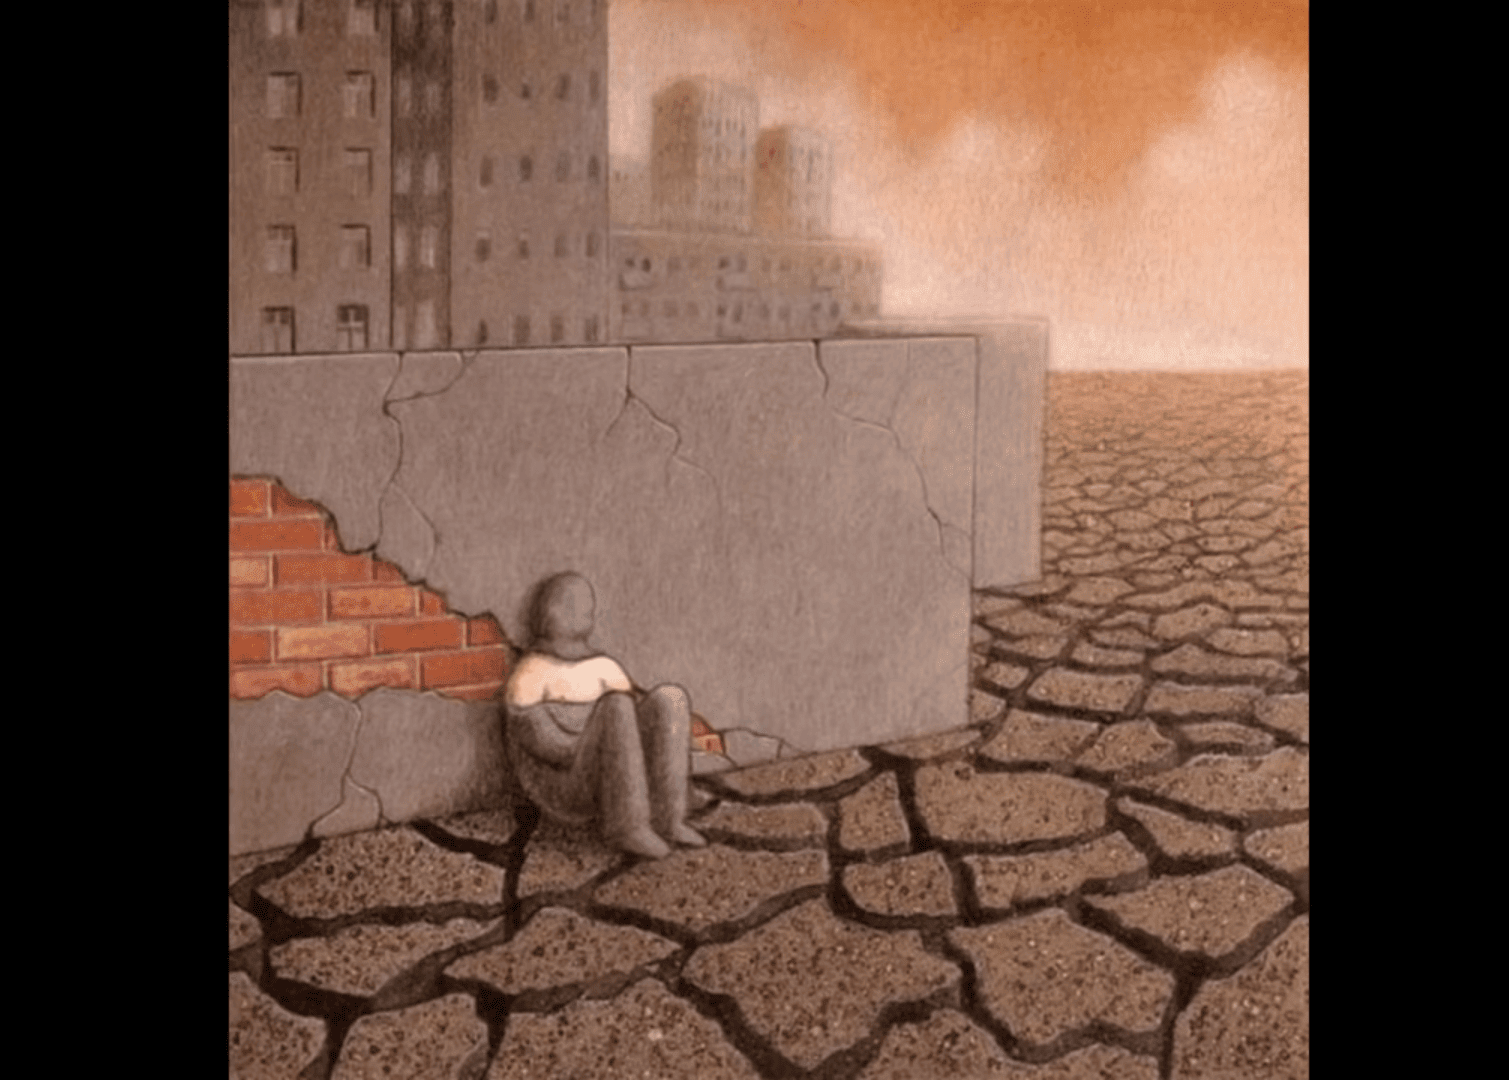 52 Illustrations Depicting The Harsh Truth Of The Modern World